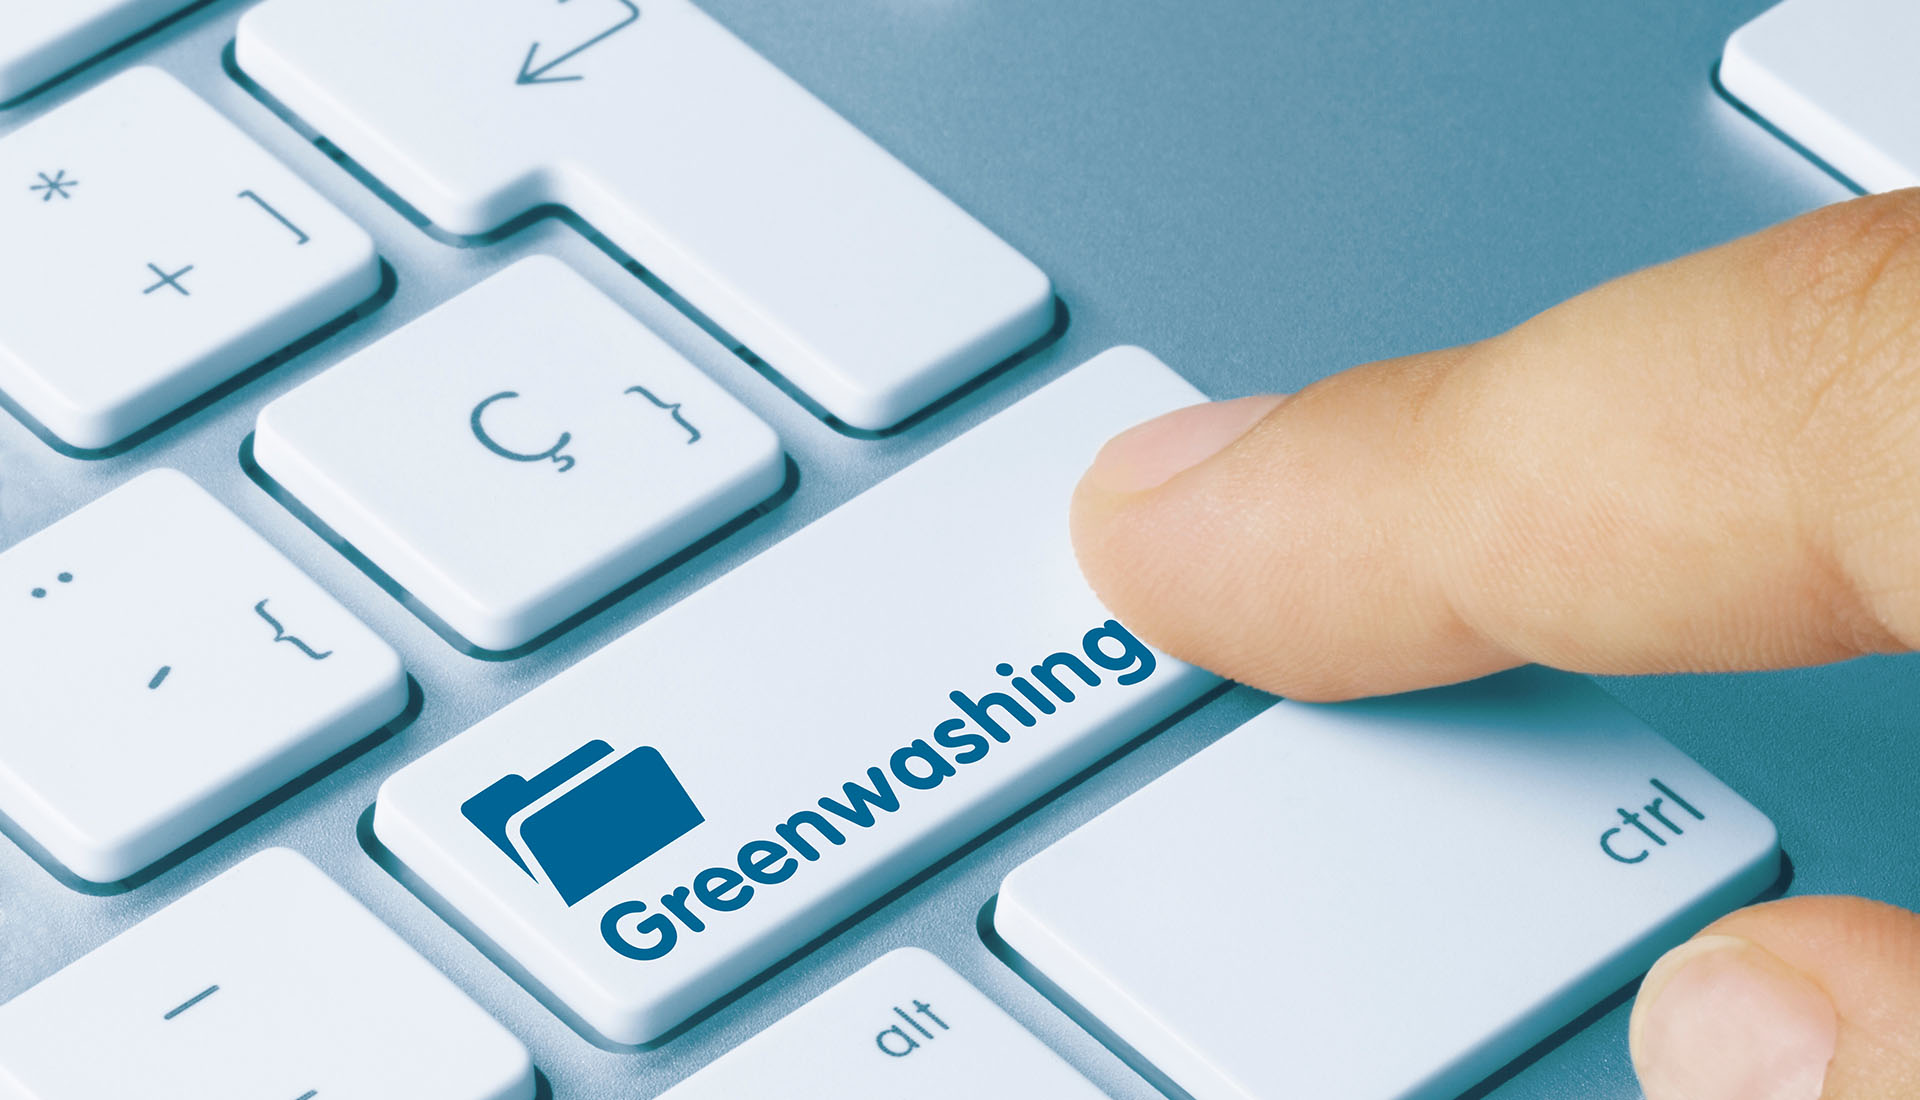 Detecting greenwashing signals by comparing ESG reports and public media